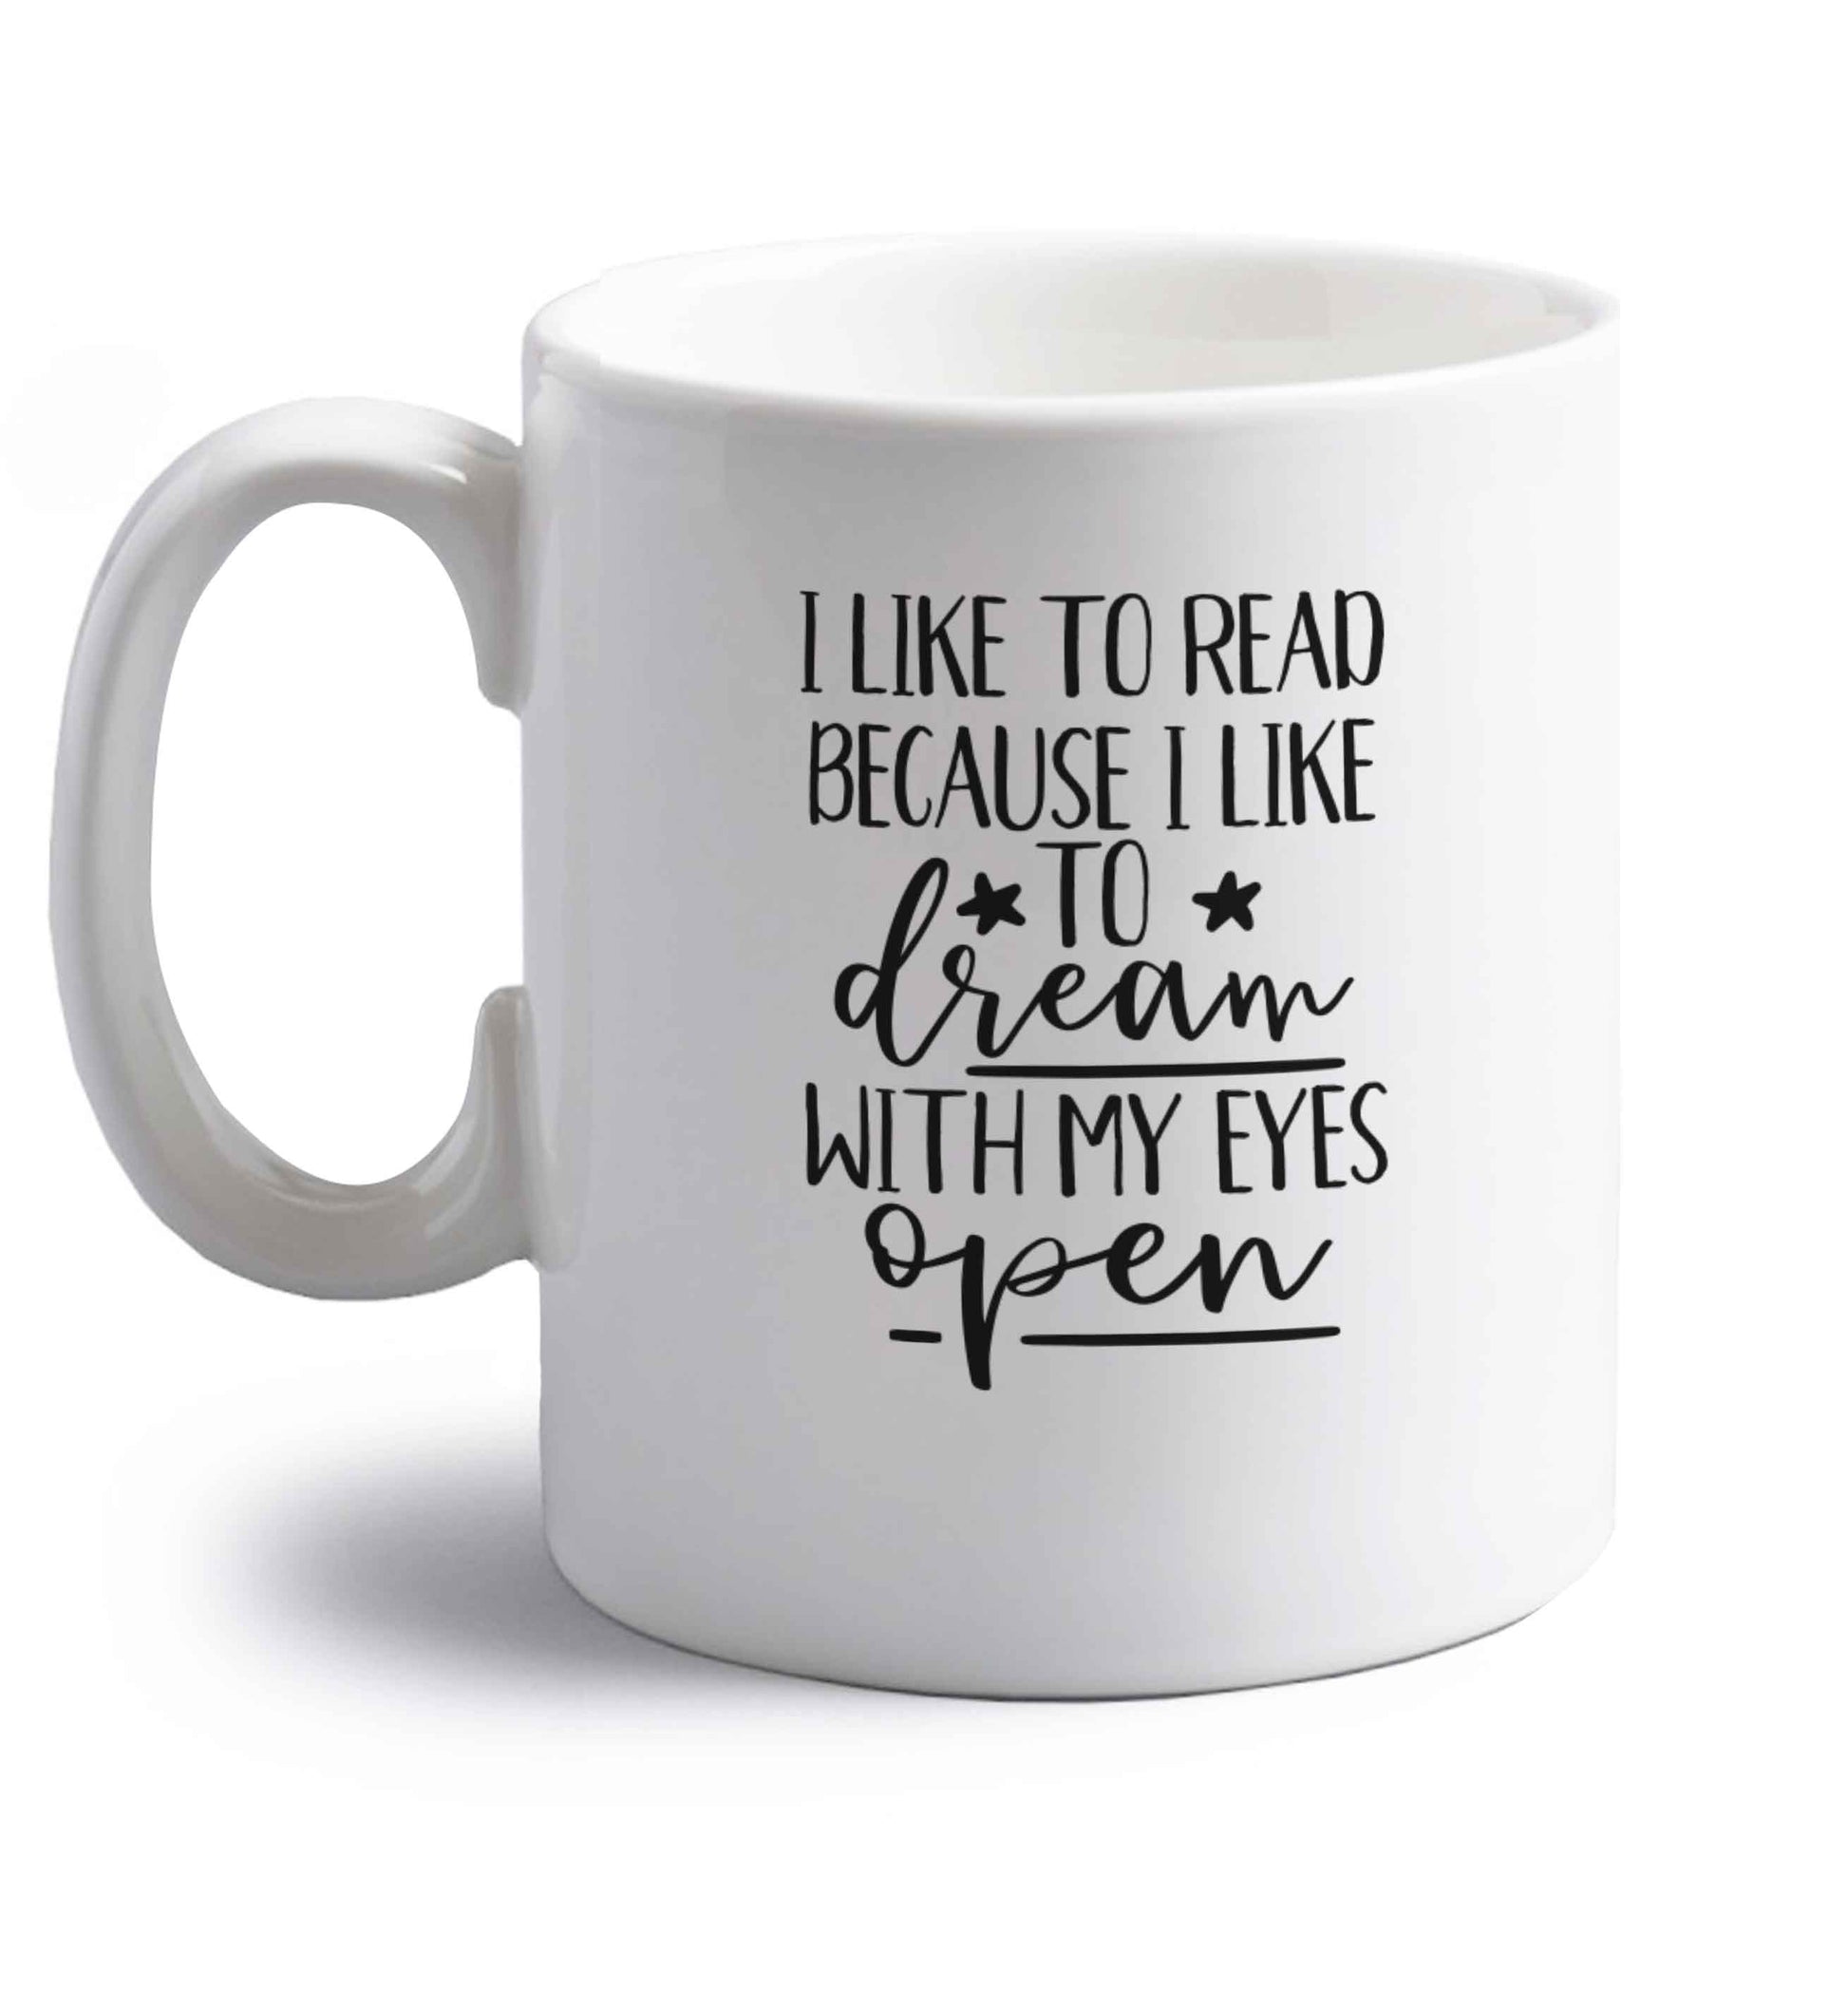 I like to read because I like to dream with my eyes open right handed white ceramic mug 